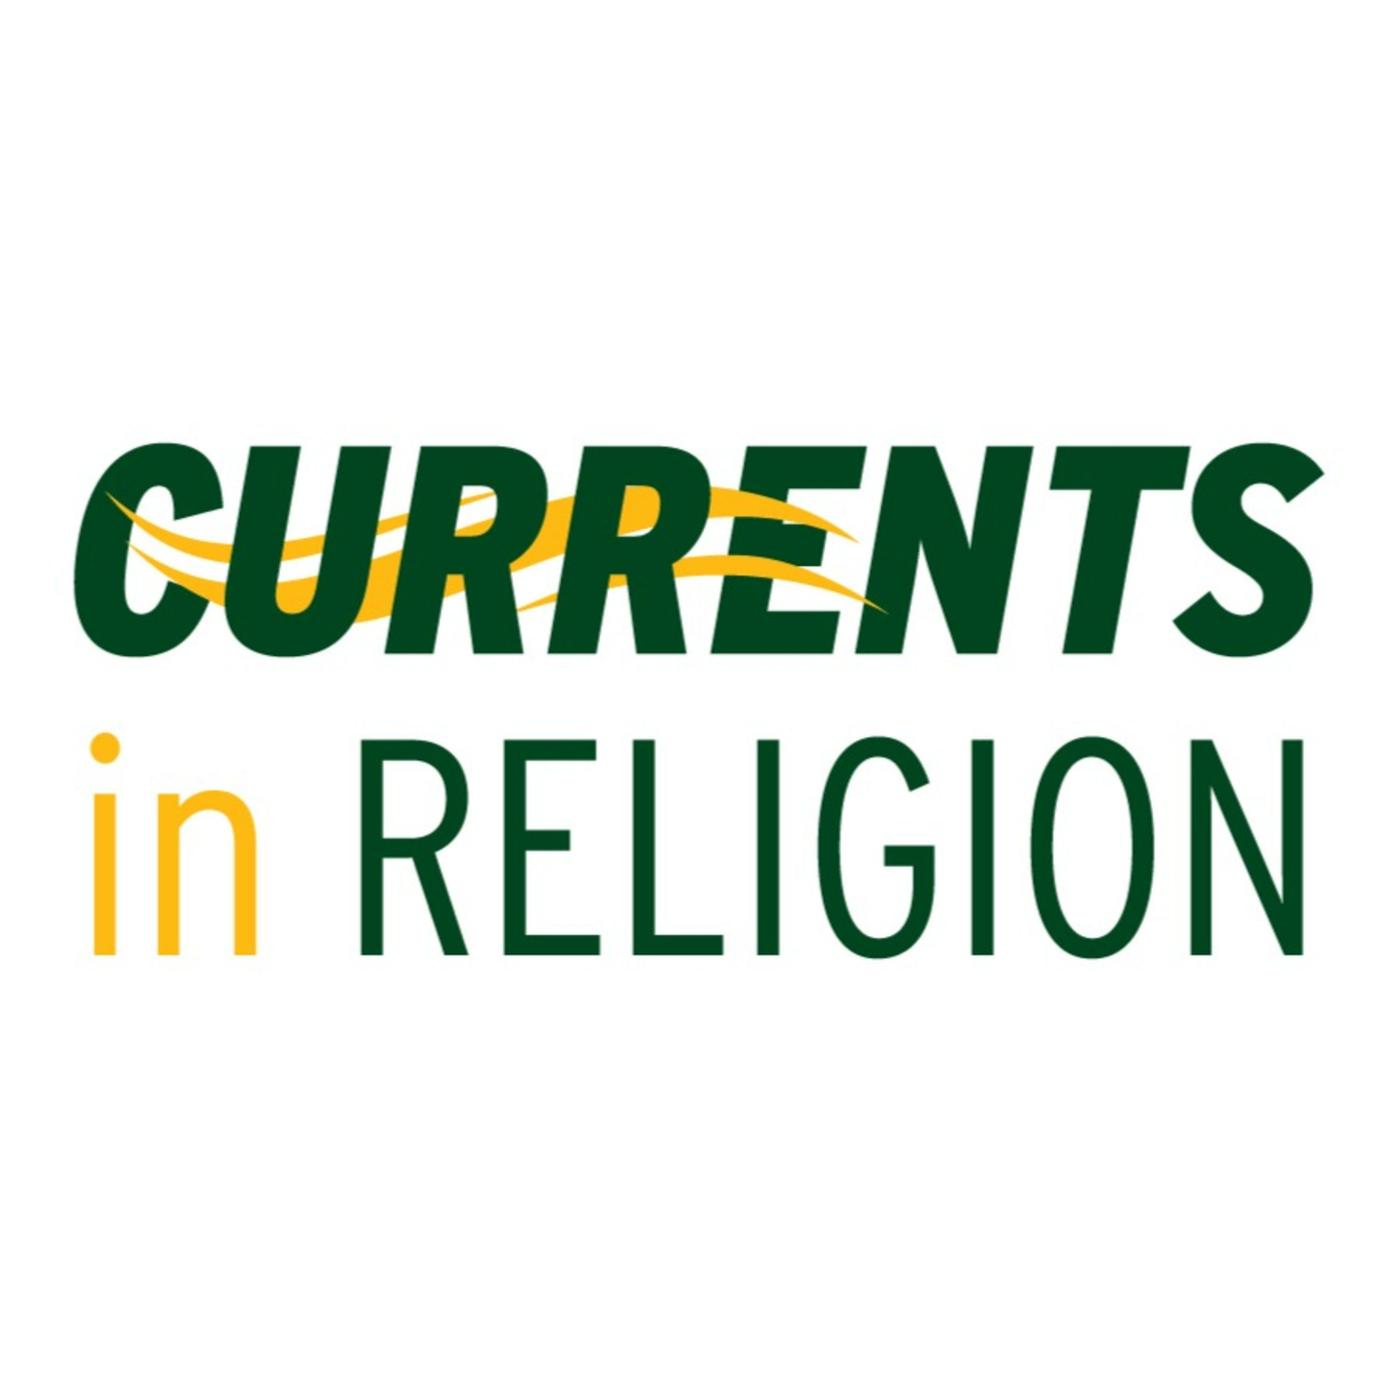 Currents in Religion - Baylor's avatar